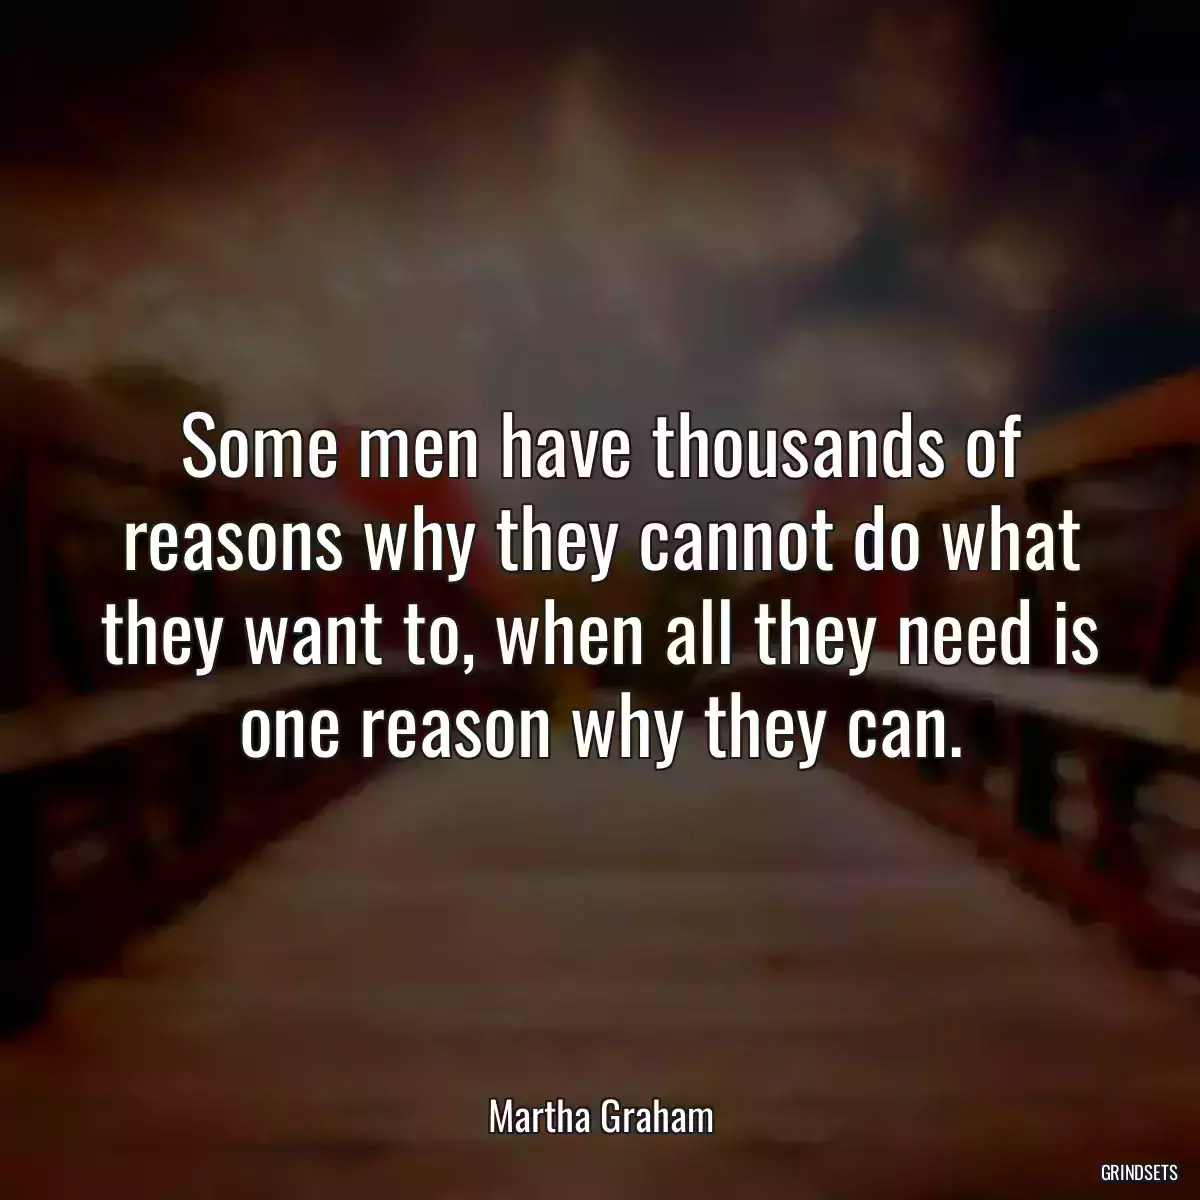 Some men have thousands of reasons why they cannot do what they want to, when all they need is one reason why they can.